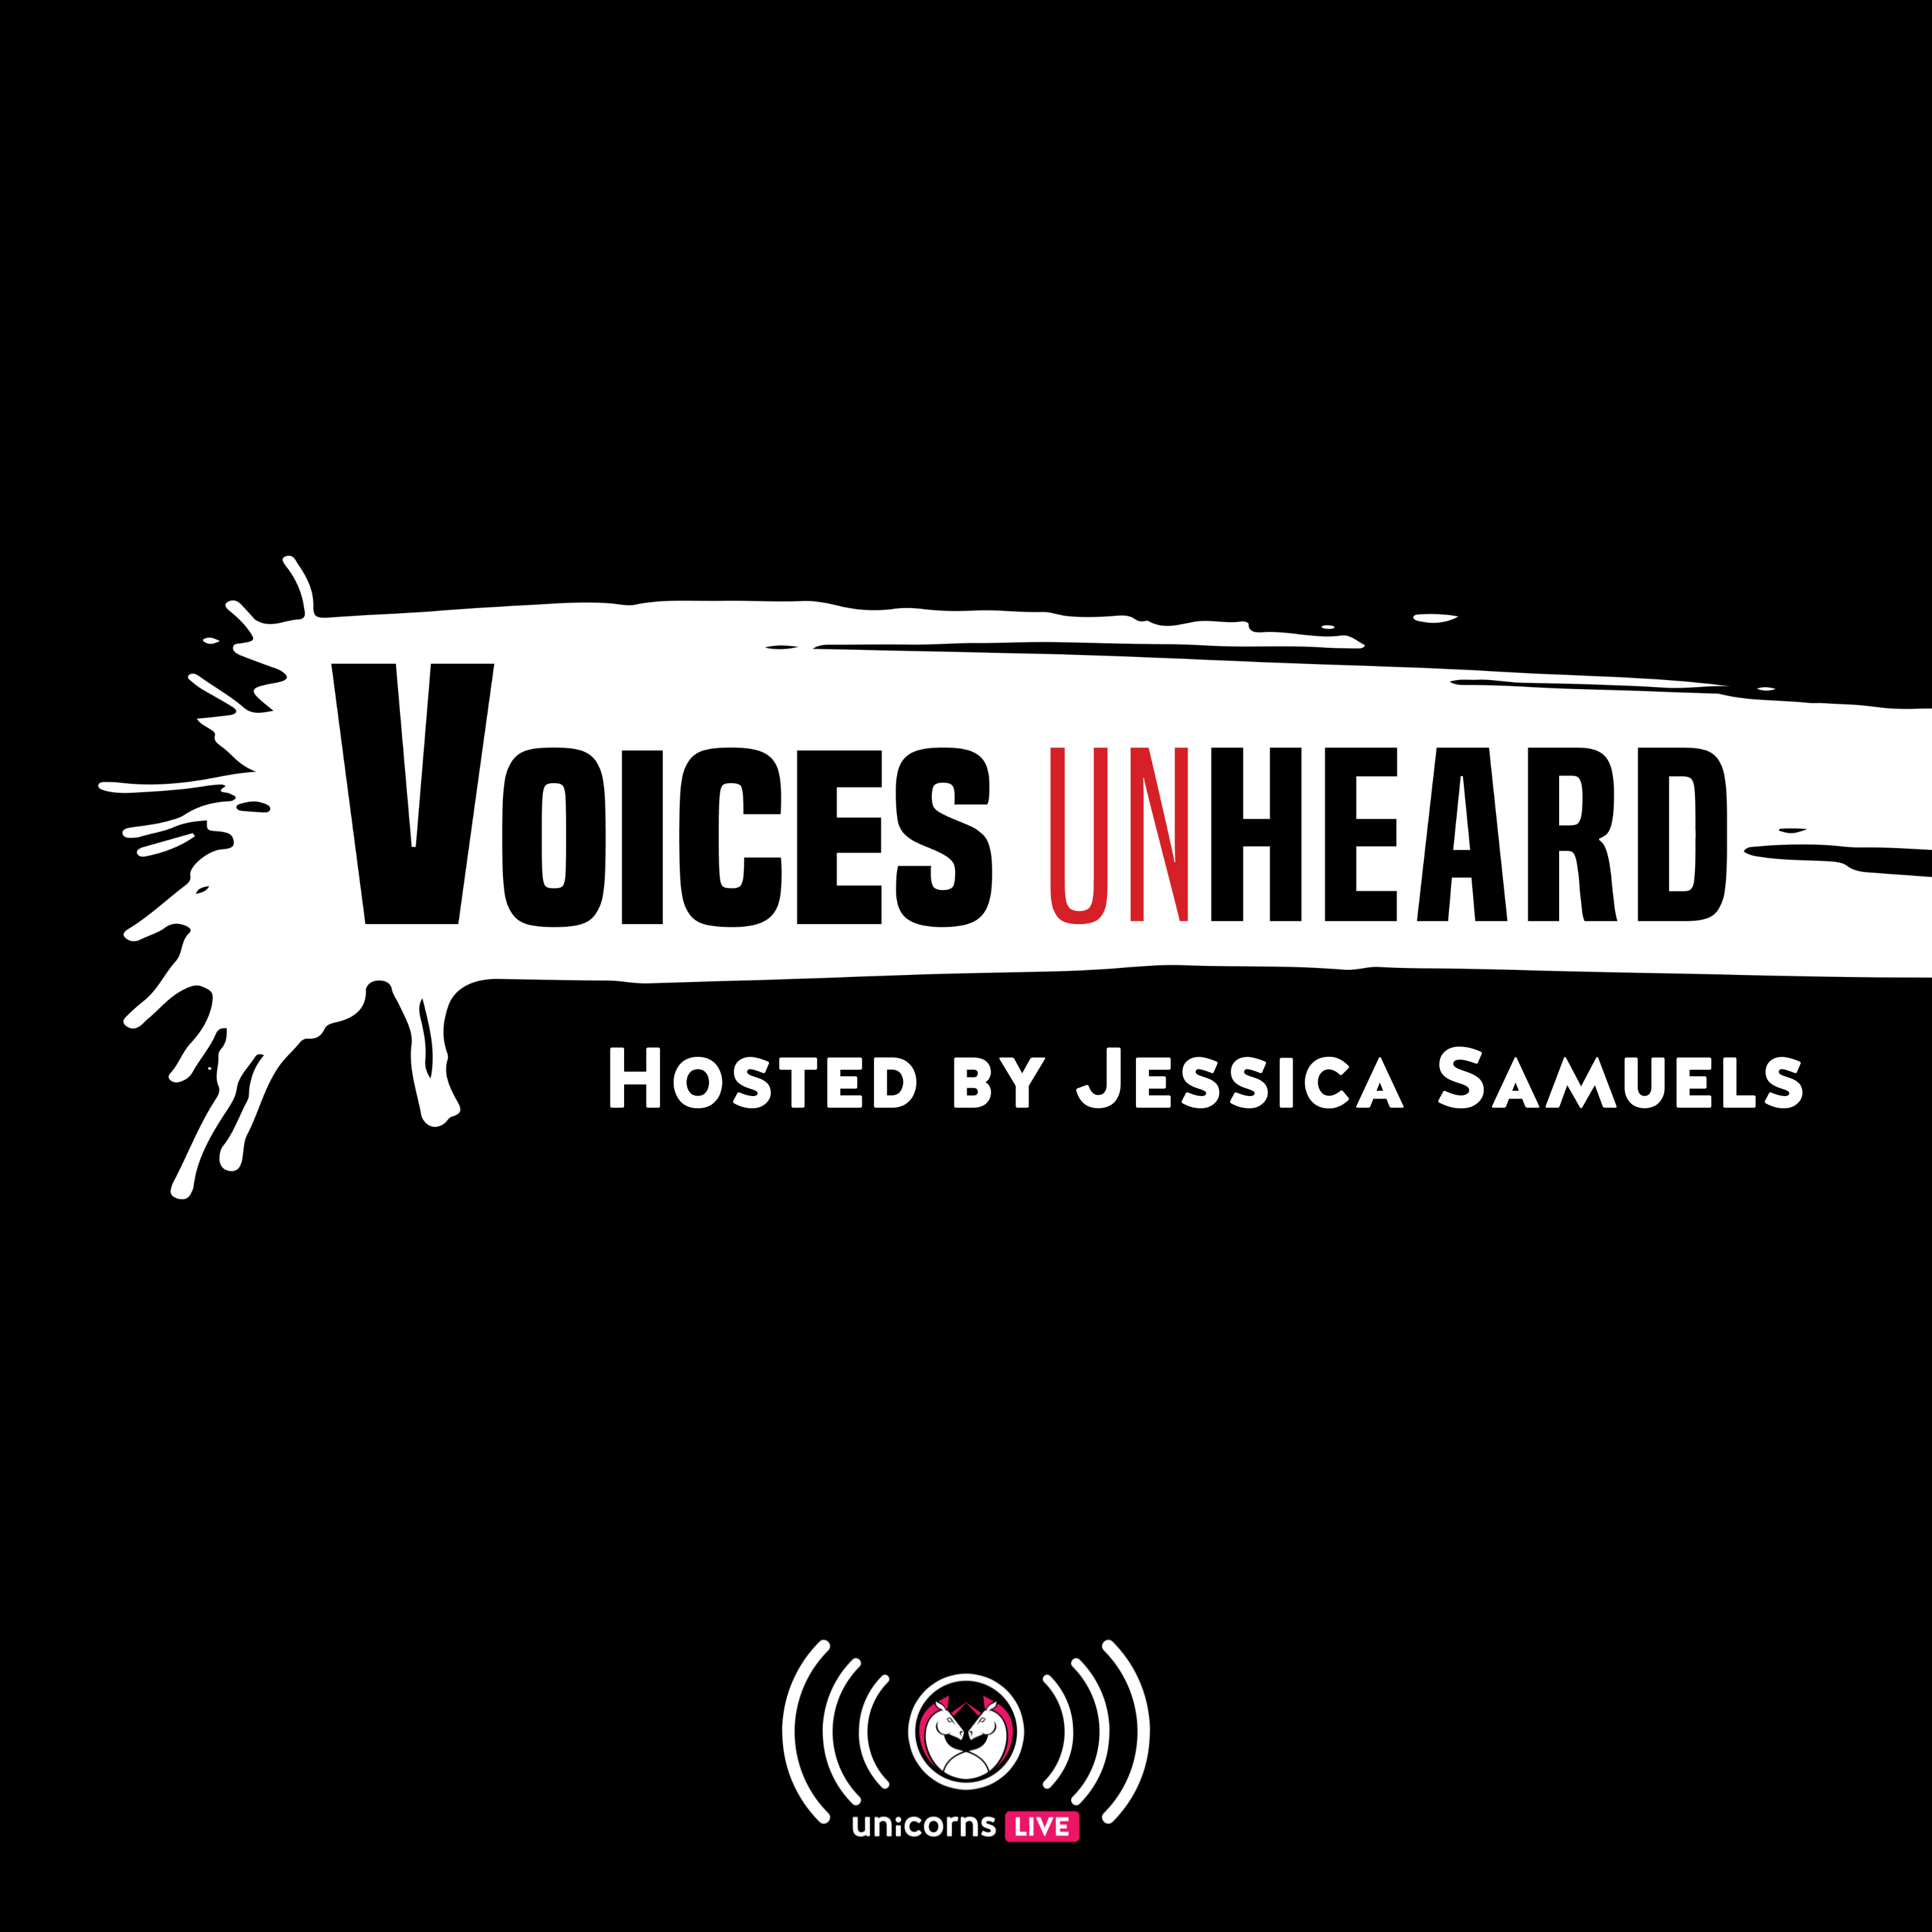 Voices Unheard - The Podcast Version